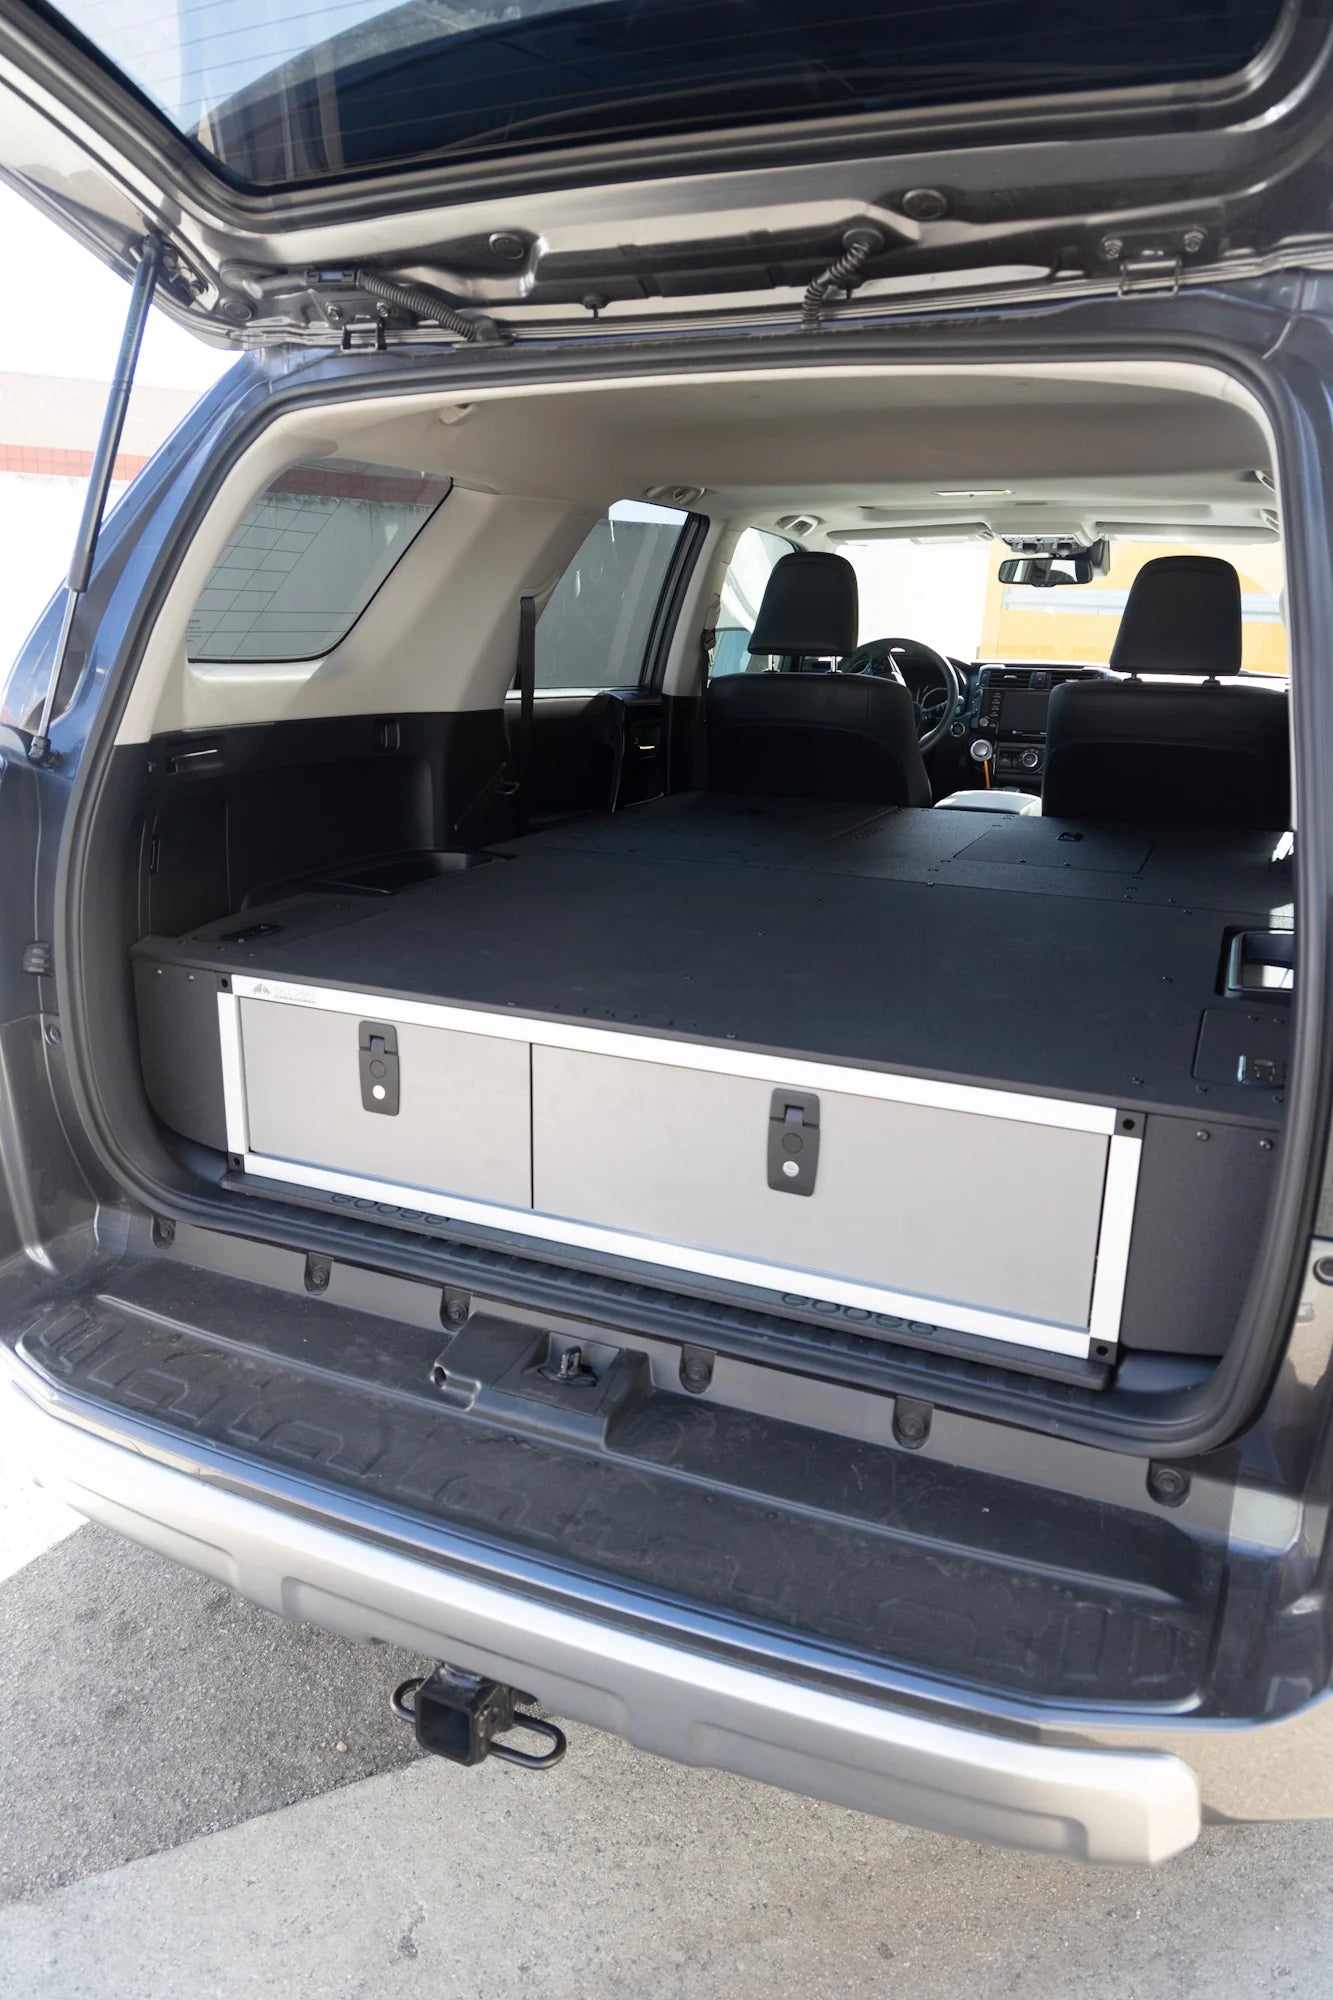 Stealth Sleep and Storage Package with Fitted Top Plate for Toyota 4Runner 2010-Present 5th Gen.